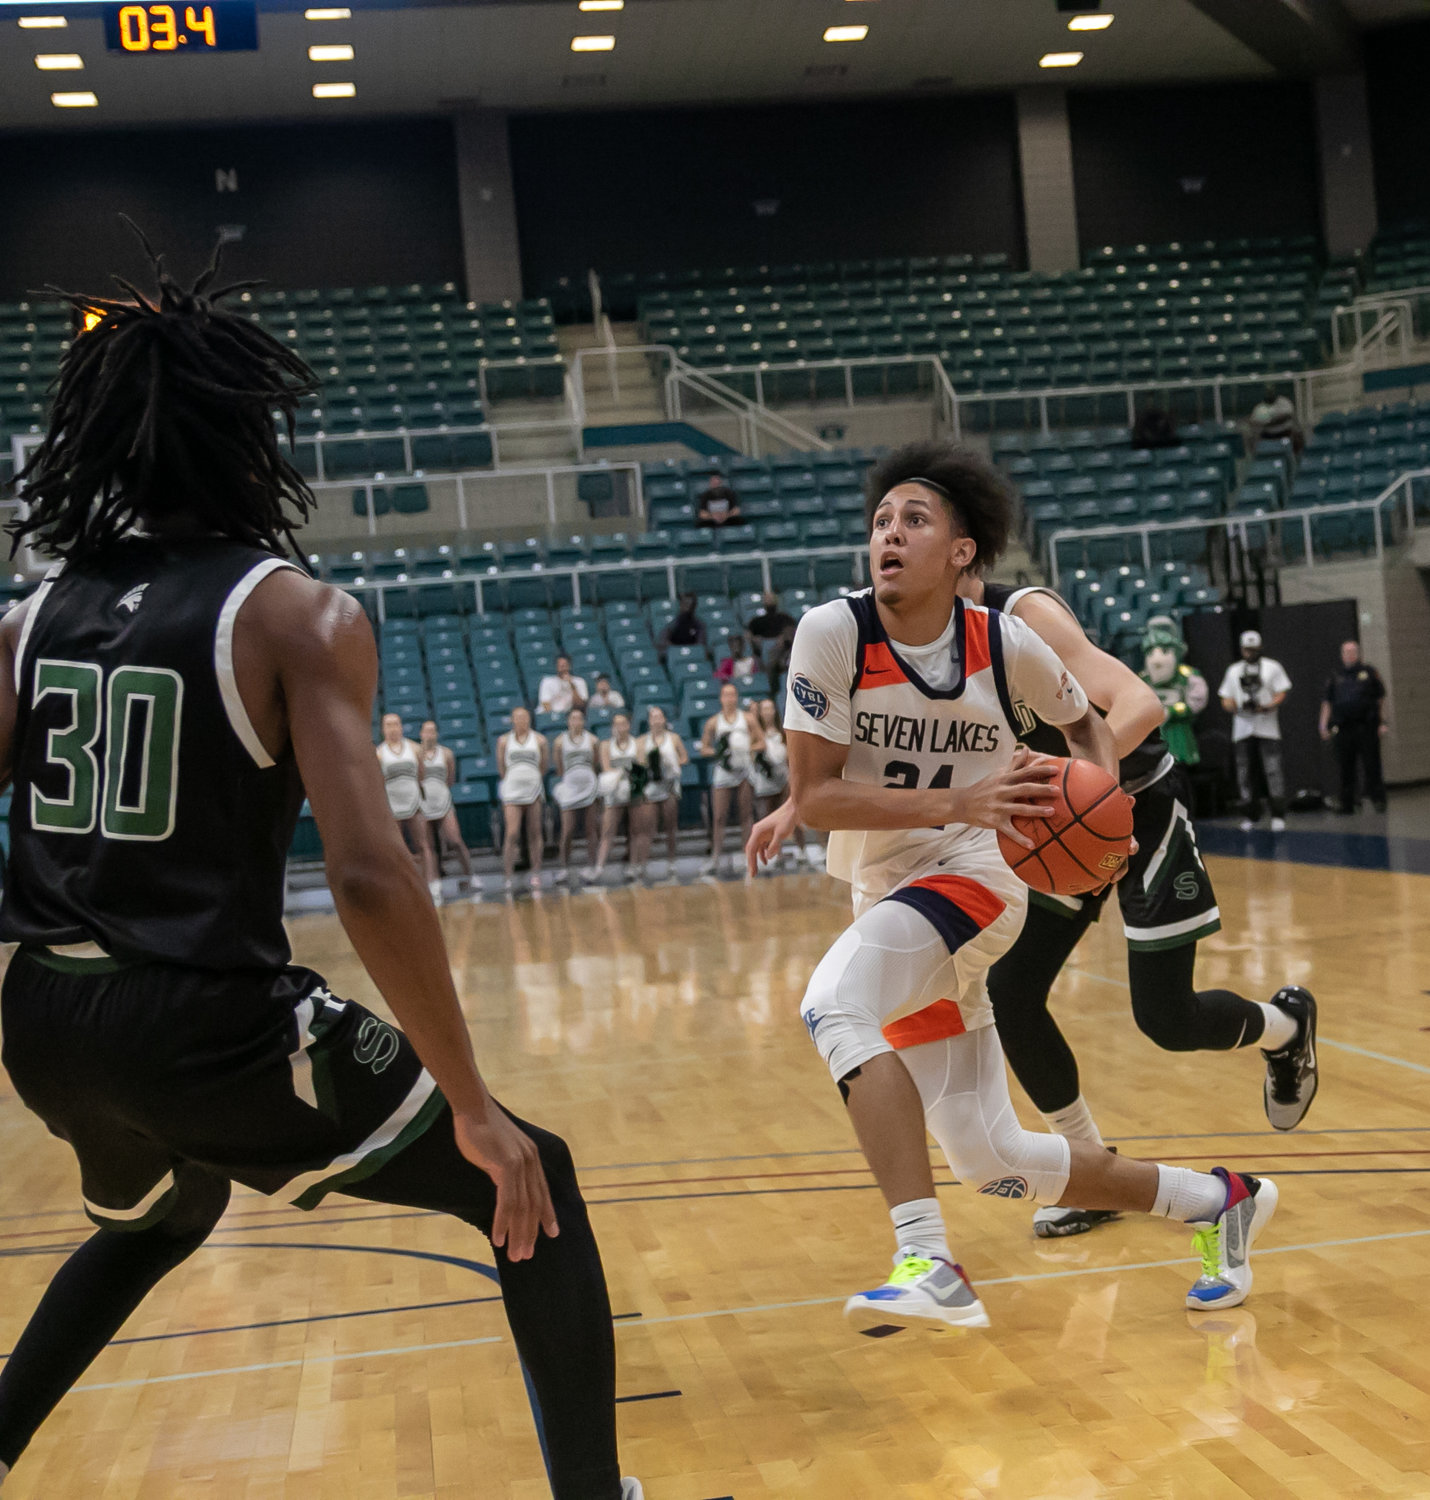 AJ Bates drives into the lane during a Class 6A Regional Quarterfinal between Seven Lakes and Stratford at the Merrell Center.